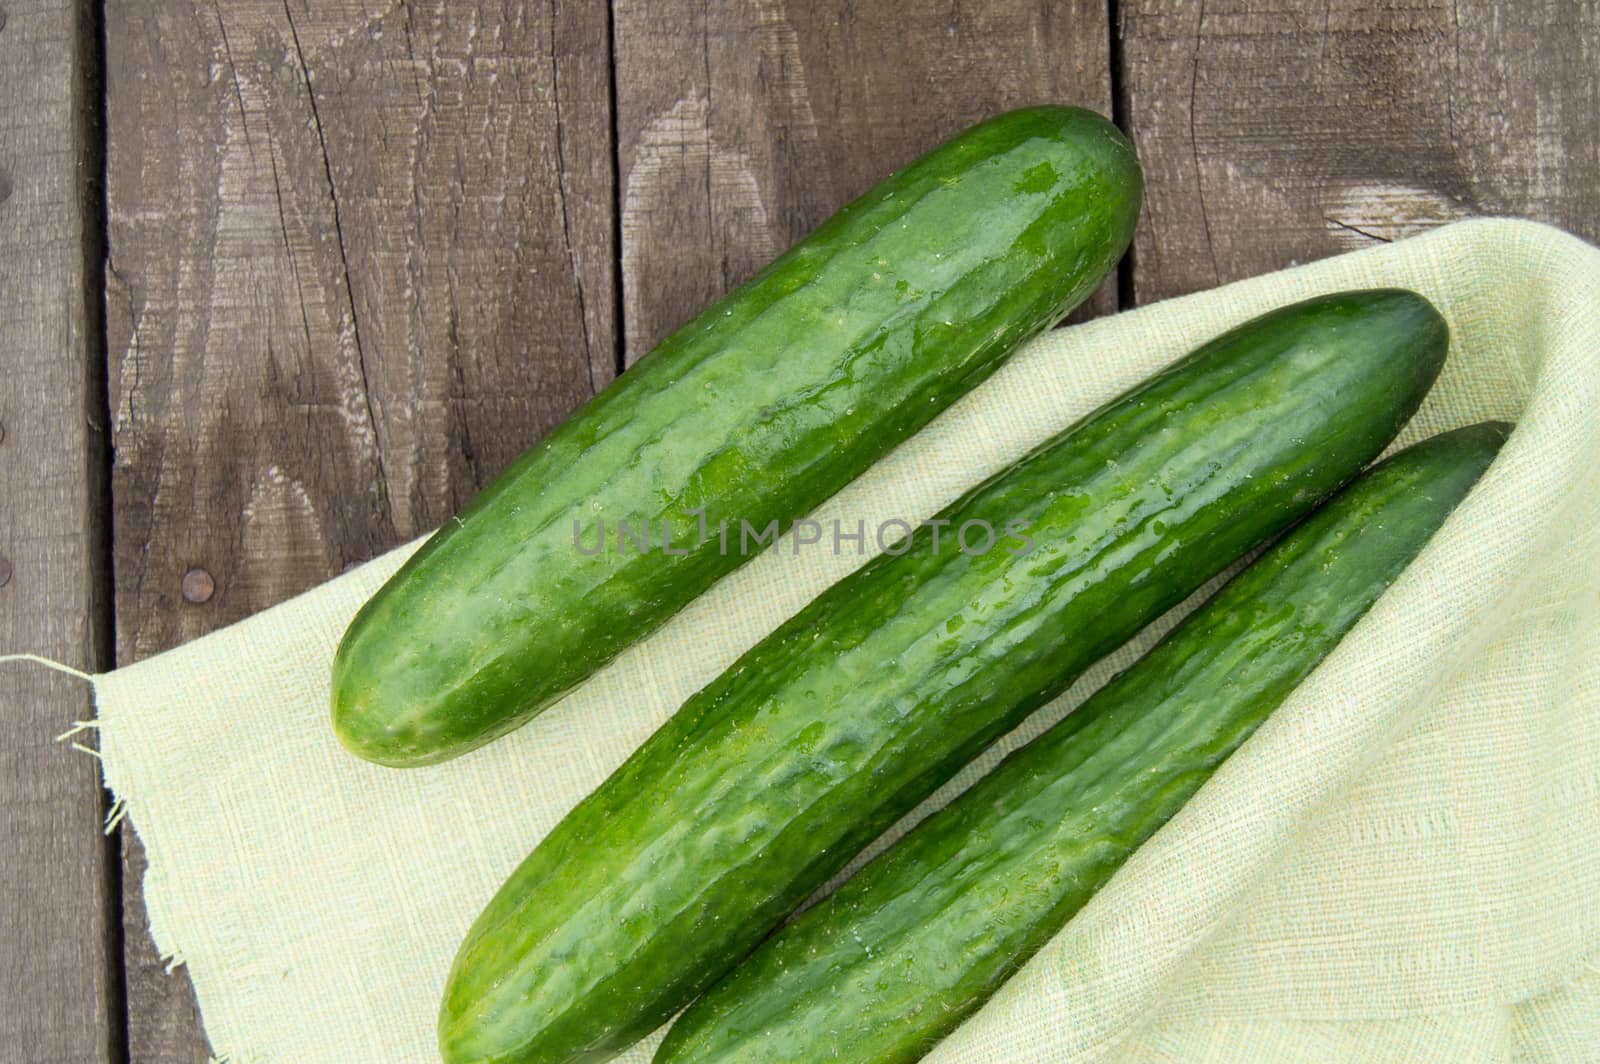 Cucumbers are lying on an old wooden background with napkin by claire_lucia